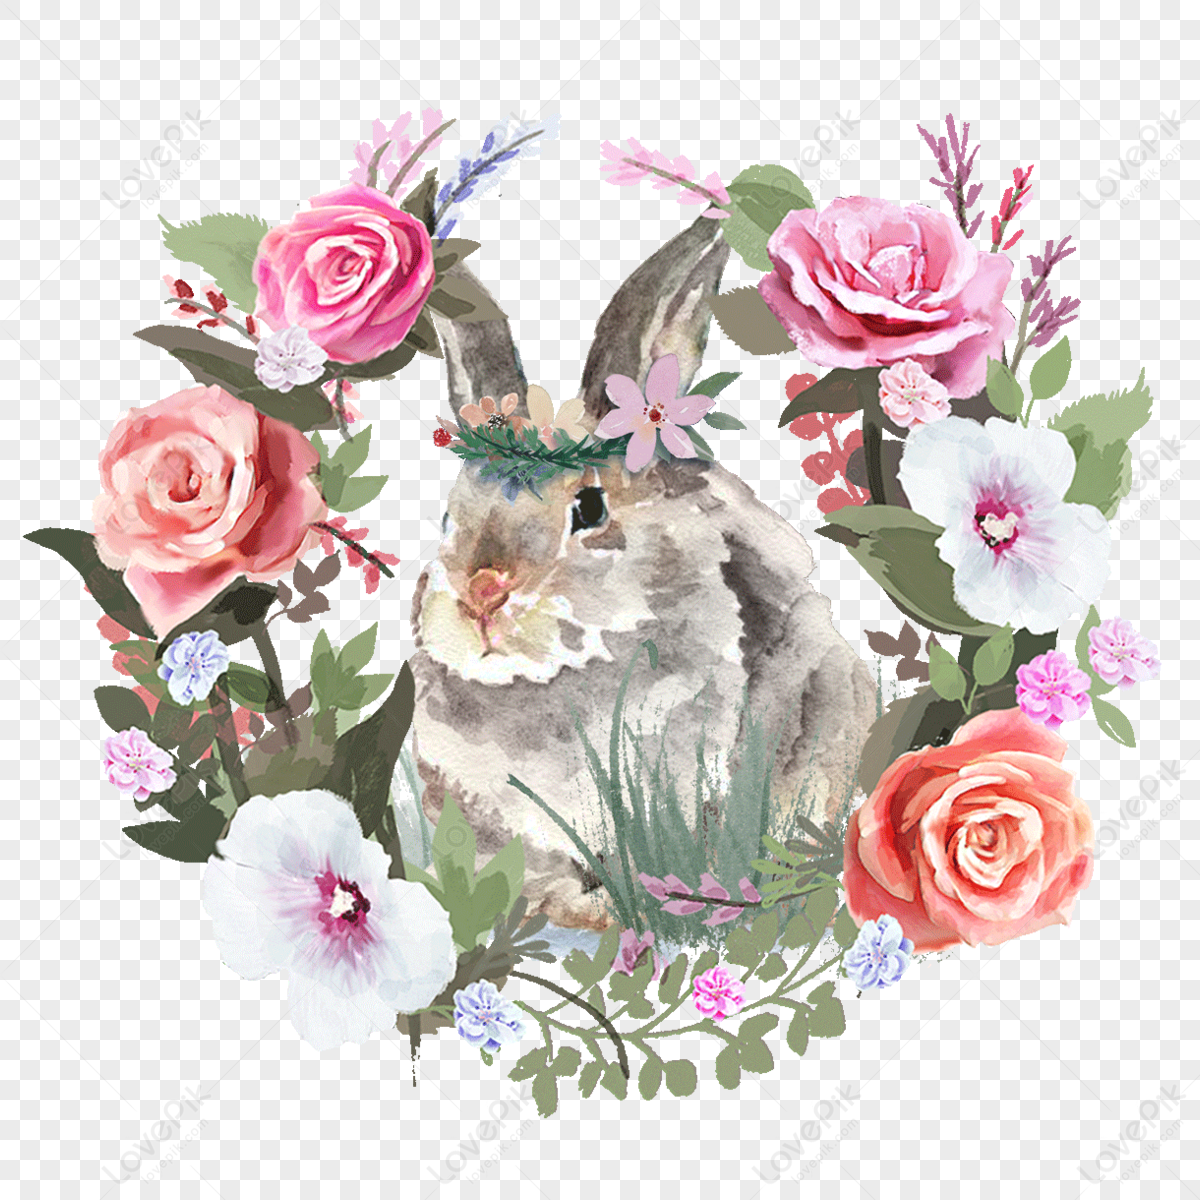 Flower cartoon animal watercolor rose,watercolor flowers,beautiful,anime png transparent background